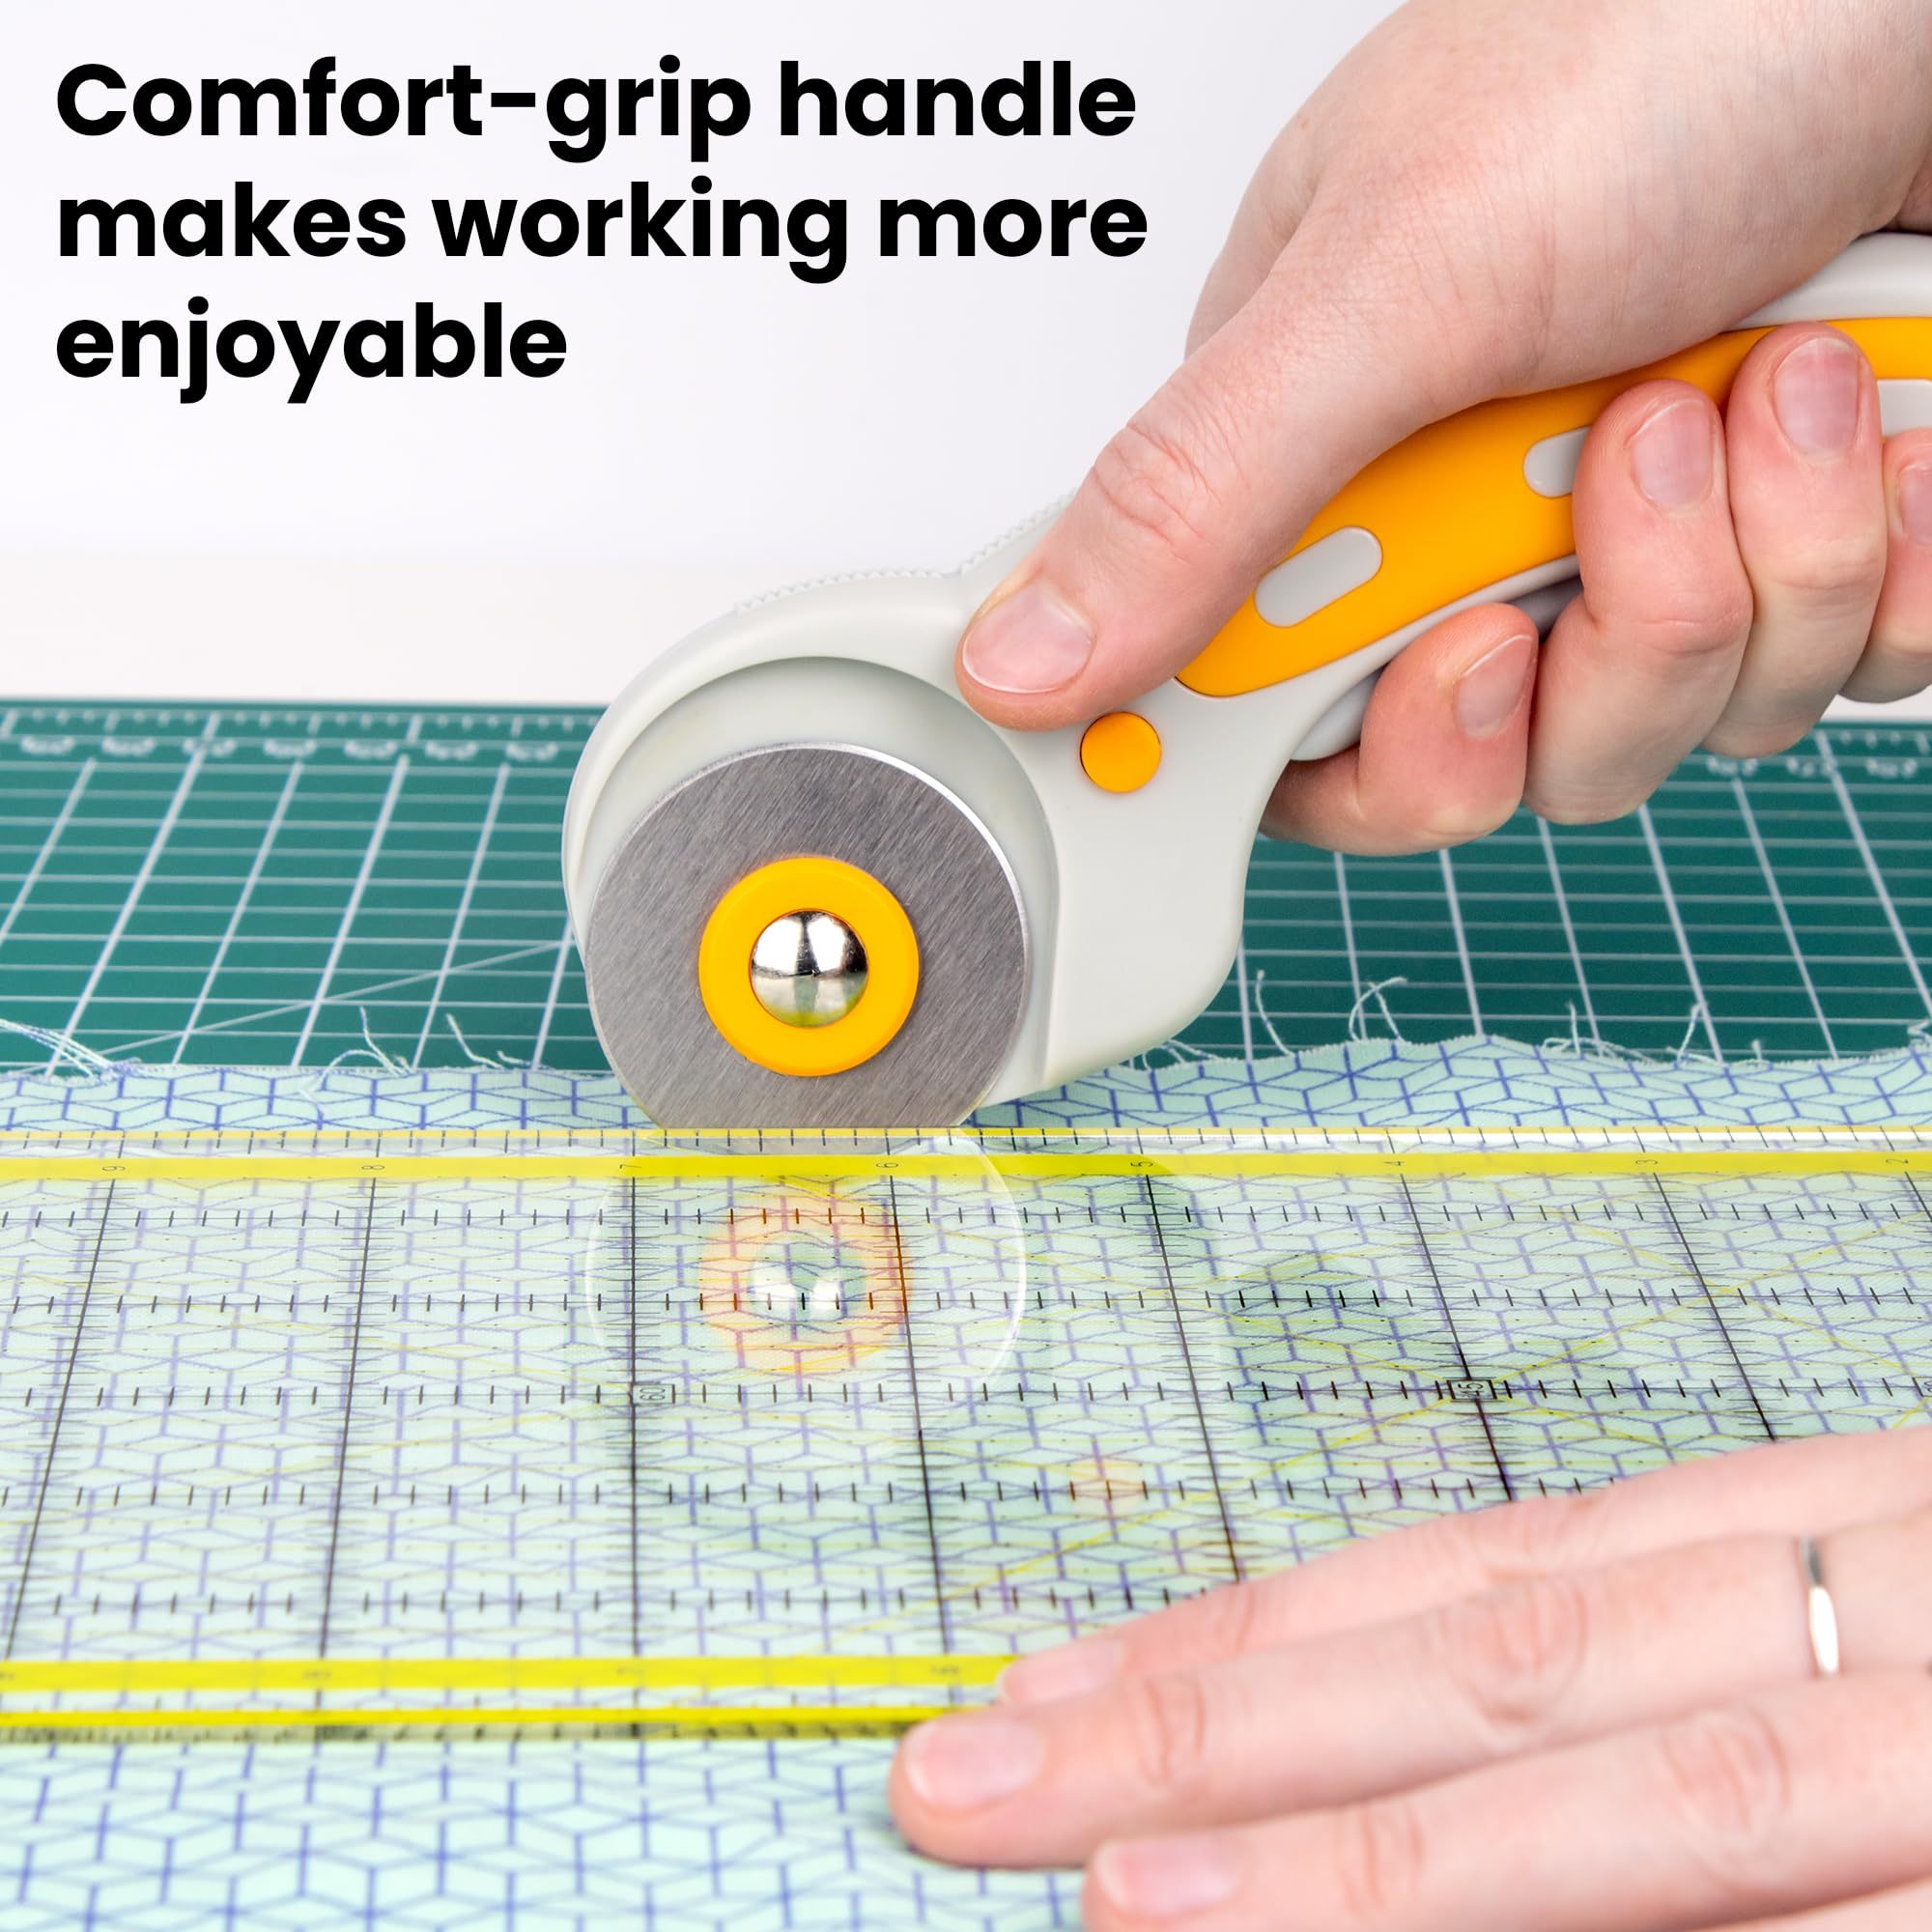 WA Portman Rotary Cutter Set & Cutting Mat for Sewing - 45mm Rotary Cutter for Fabric & 5 Blades - 24x36 In Fabric Cutting Mat - 6x24 In Acrylic Ruler for Cutting Fabric - Rotary Cutter and Mat Set